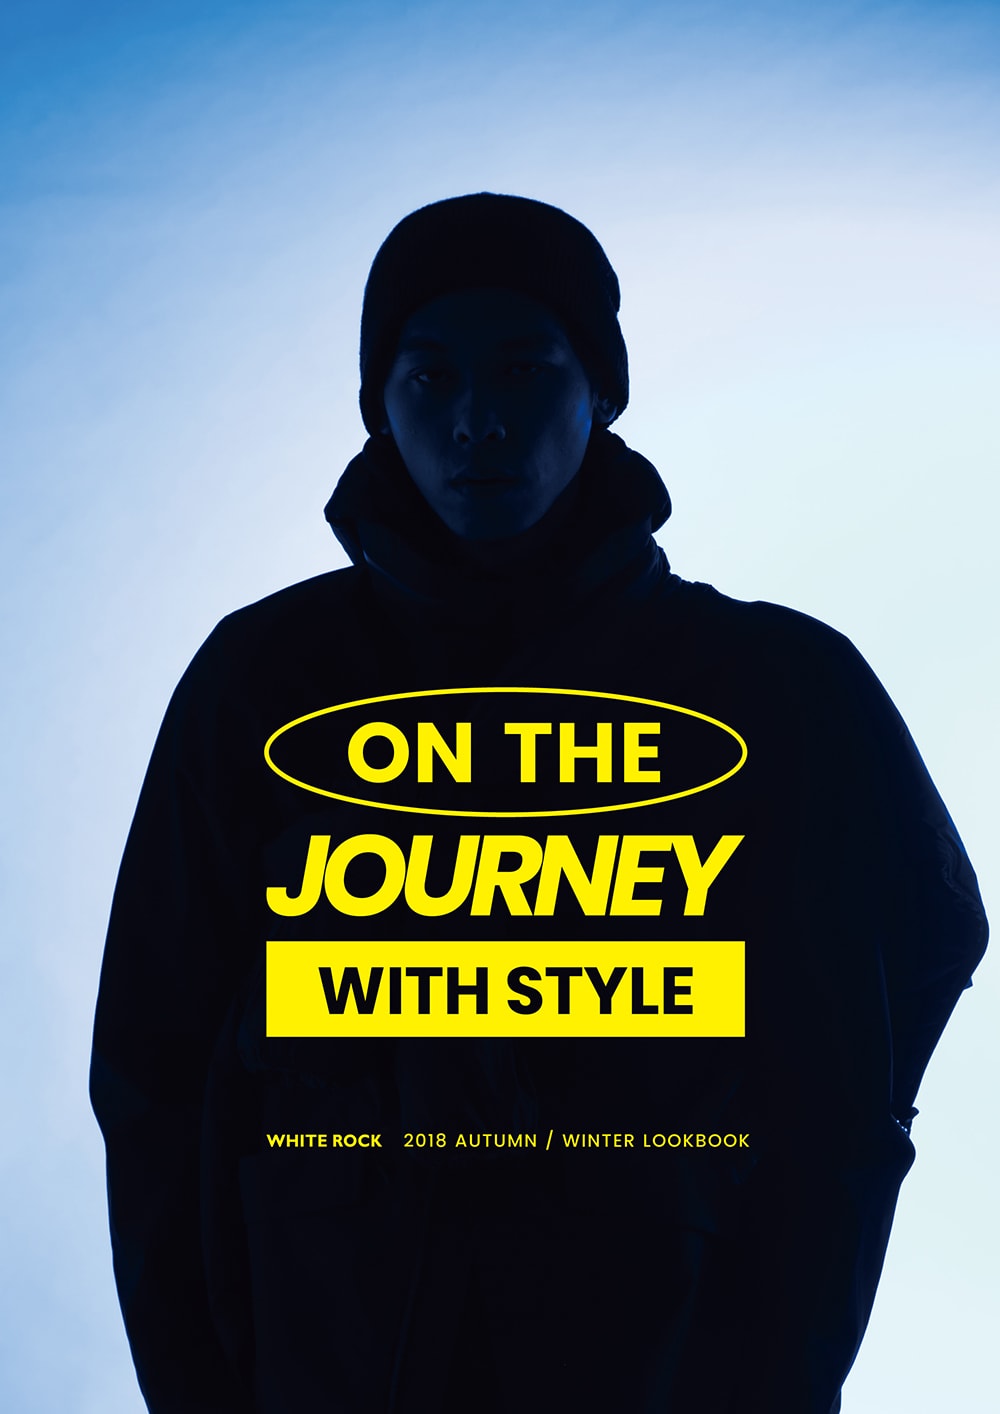 White Rock 2018 最新秋冬「On The Journey With Style」 Lookbook 發佈